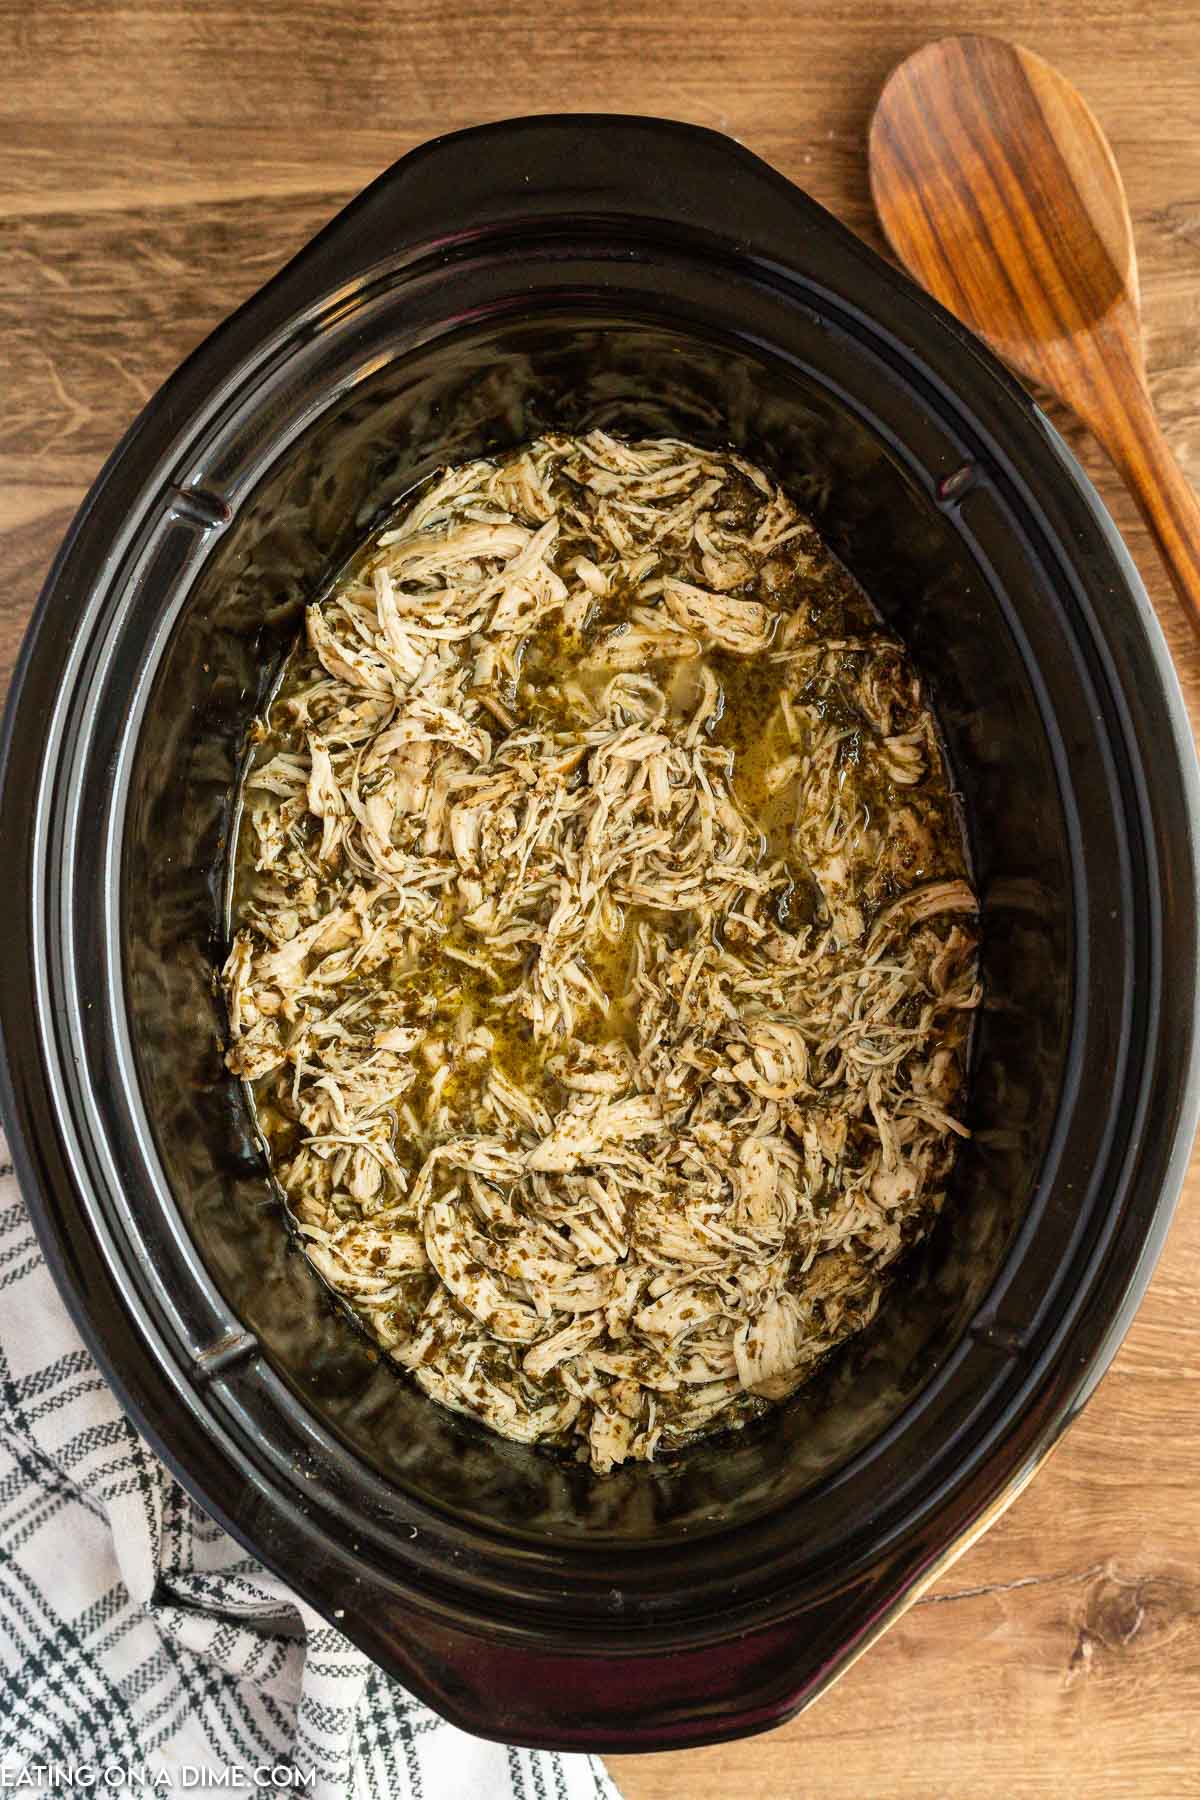 Placing the shredded chicken back in the slow cooker